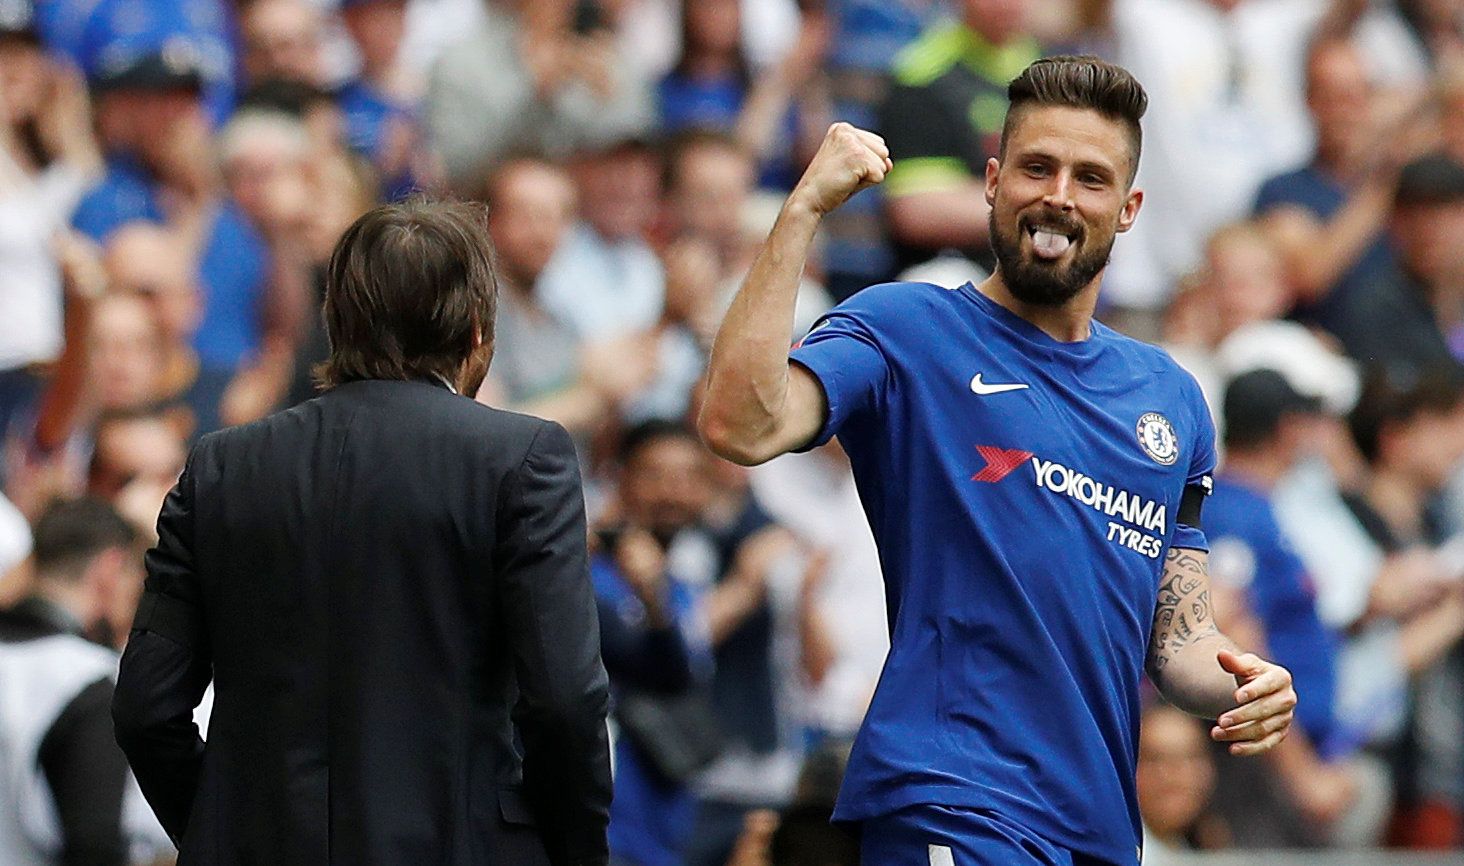 Soccer Football - FA Cup Semi Final - Chelsea v Southampton - Wembley Stadium, London, Britain - April 22, 2018   Chelsea's Olivier Giroud celebrates scoring their first goal with Chelsea manager Antonio Conte              REUTERS/Darren Staples